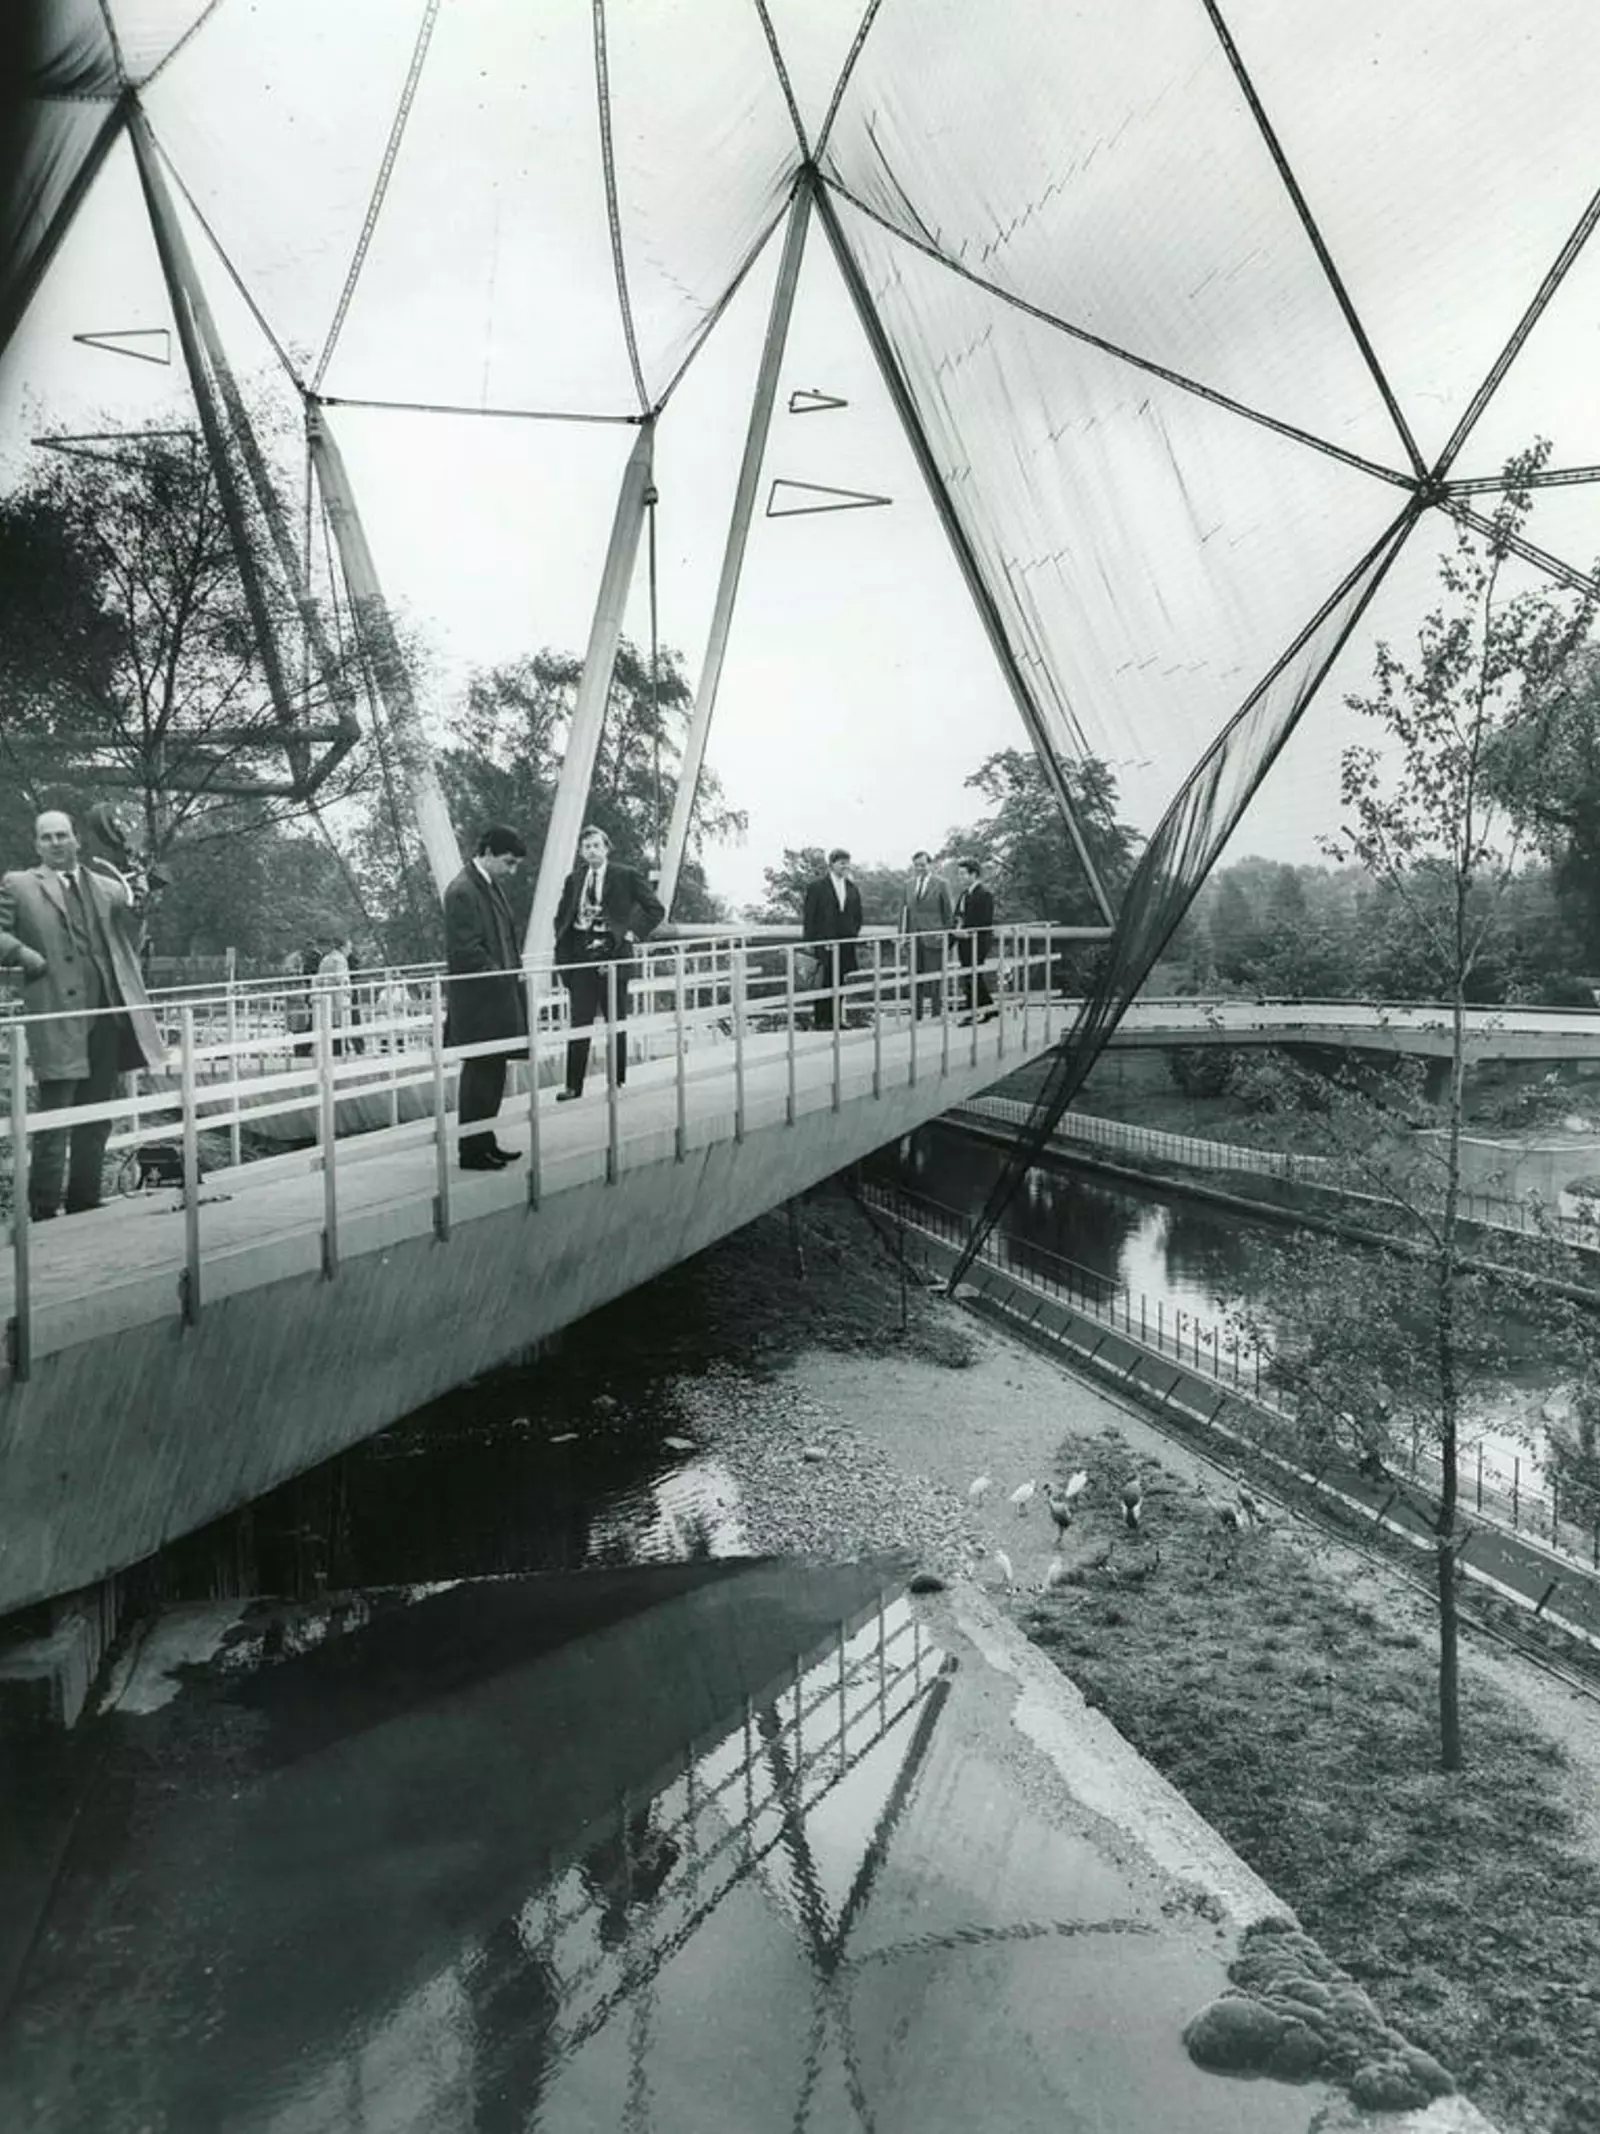 The Snowdon Aviary with Press men on the walkway looking down to Grey Crowned Cranes and Egrets below. 27th May 1965.